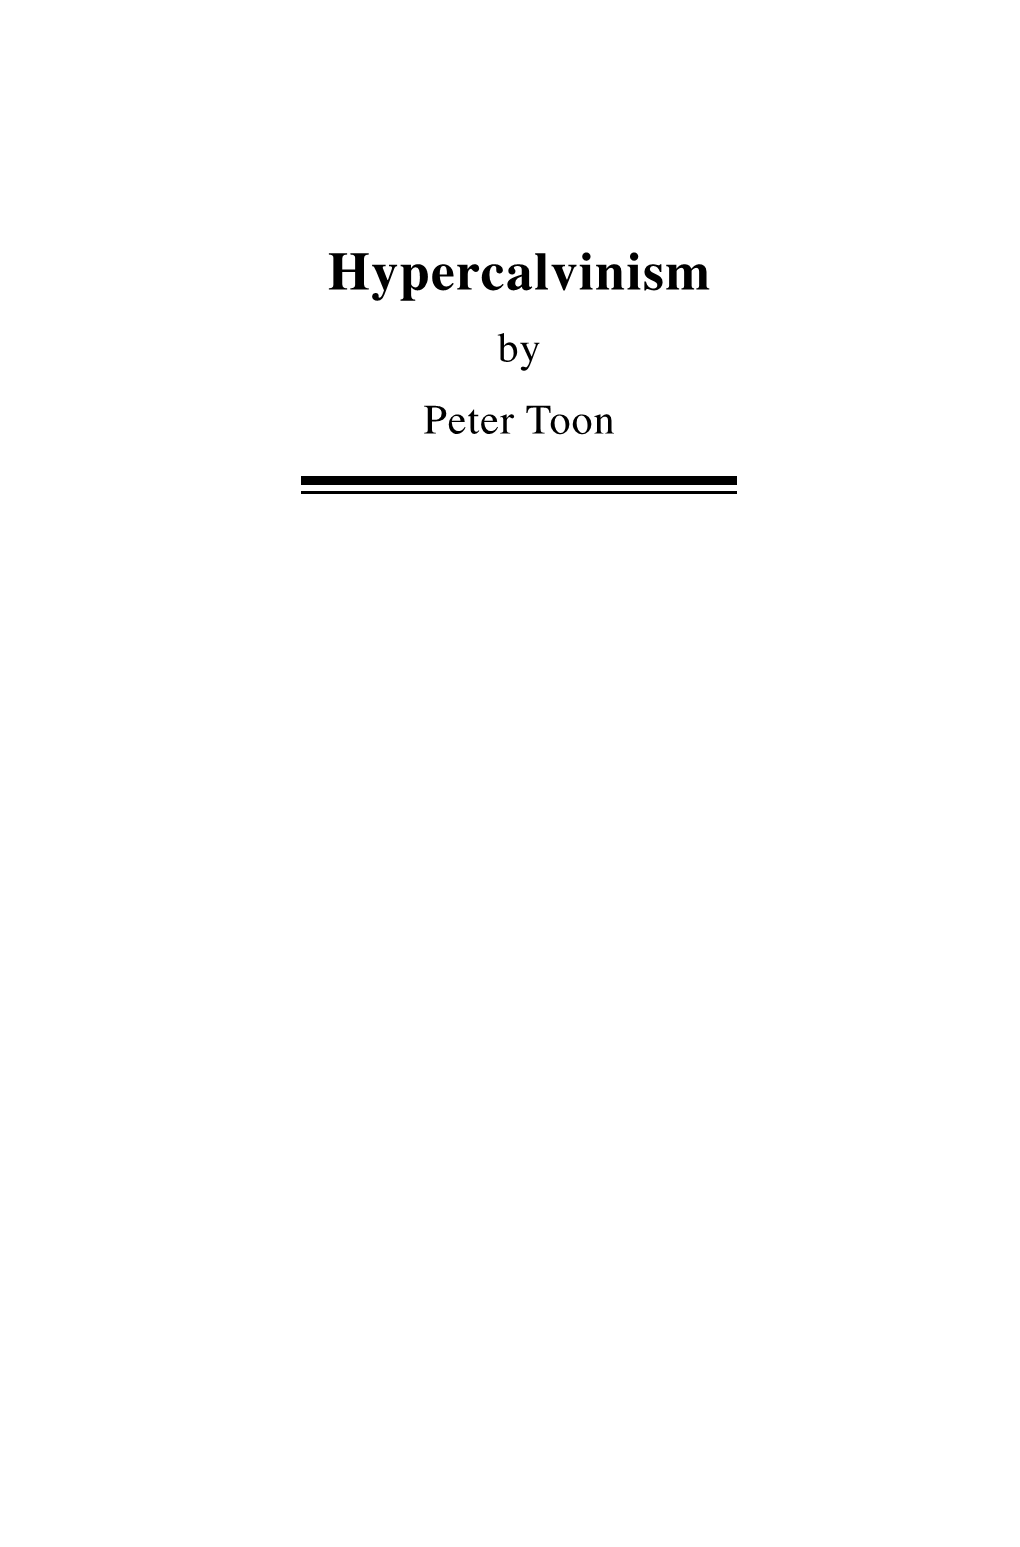 Hypercalvinism by Peter Toon the EMERGENCE OF